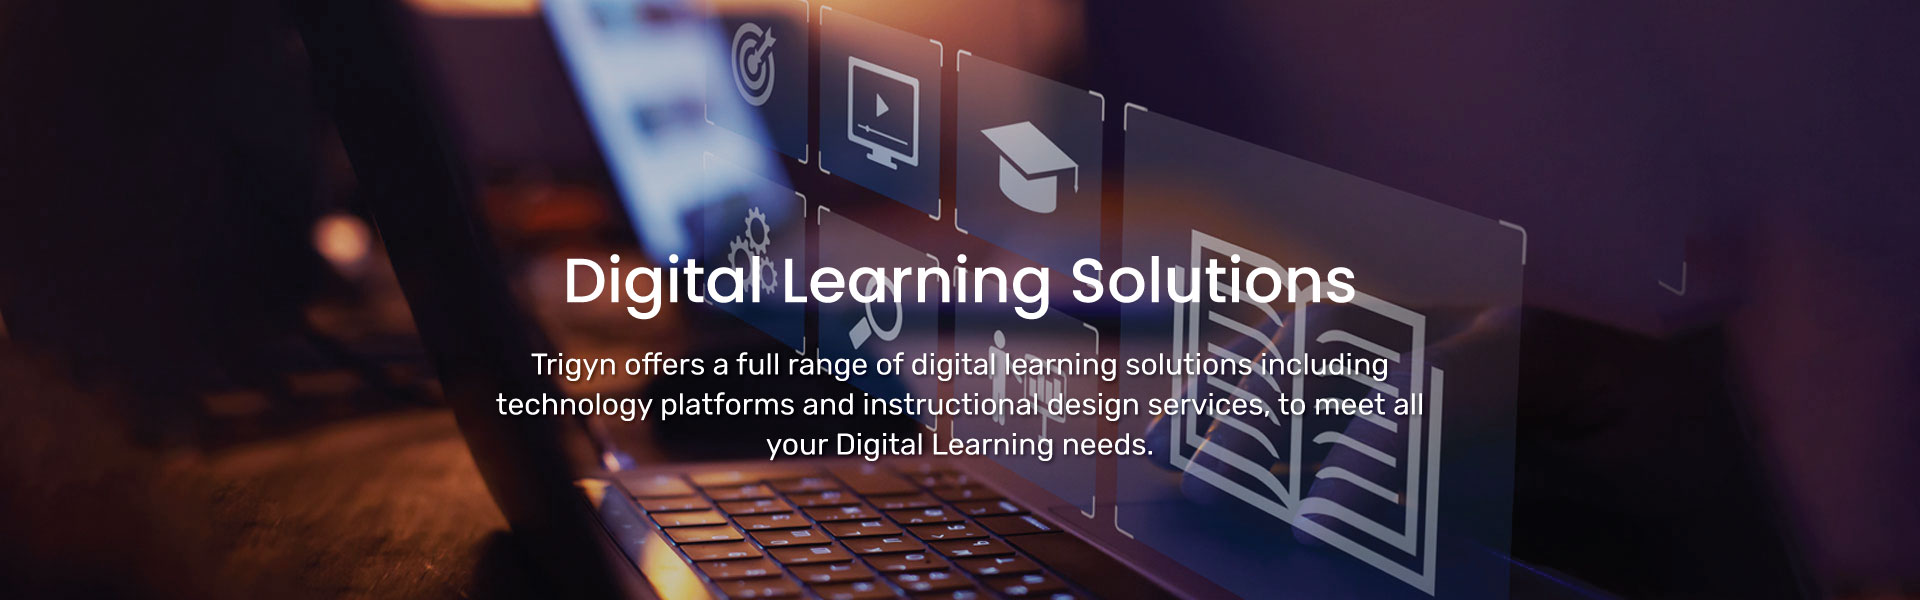 Digital Learning Solutions and Services